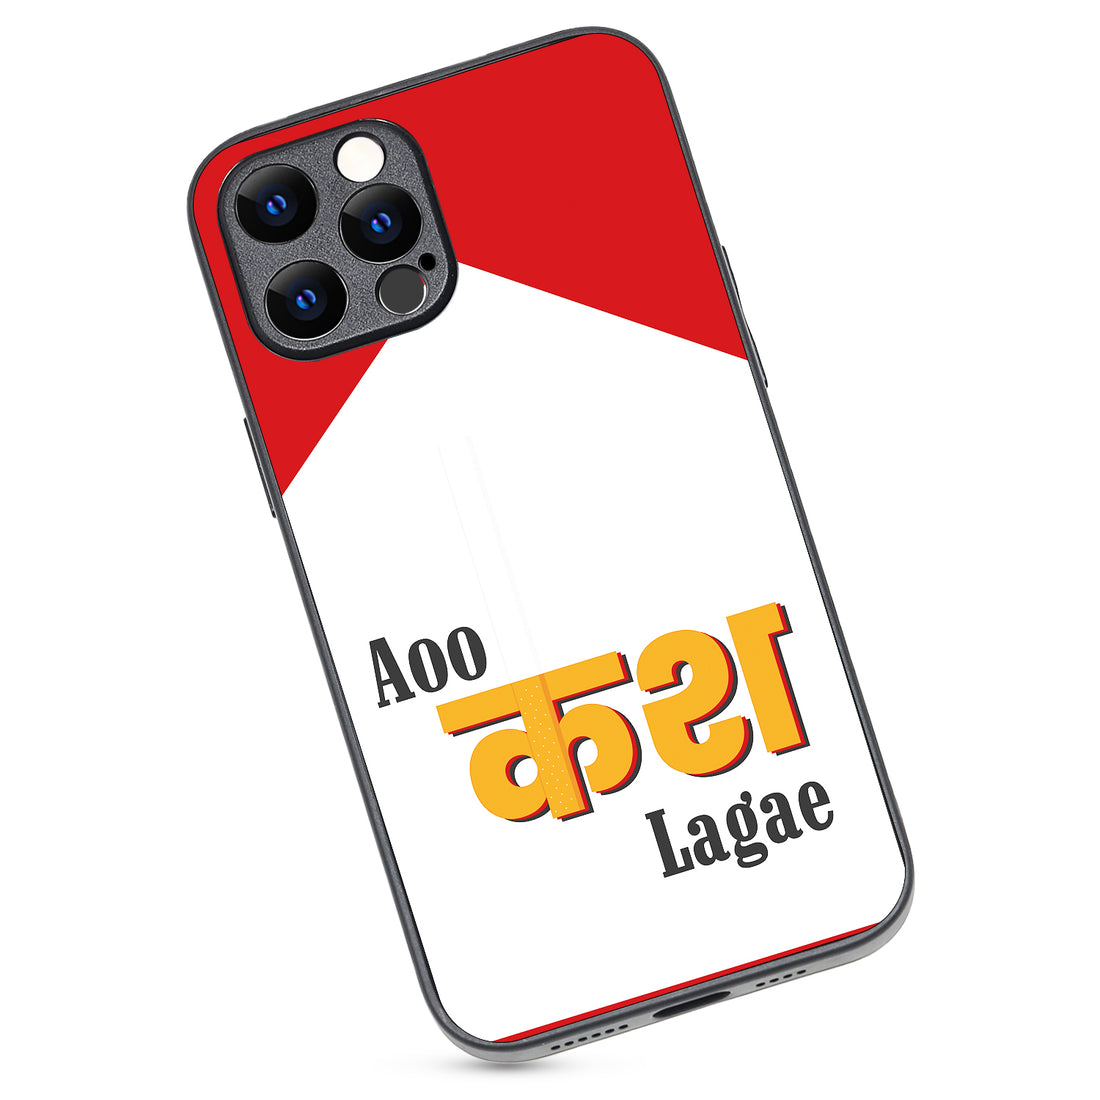 Aao Kash Lagaye Motivational Quotes iPhone 12 Pro Max Case